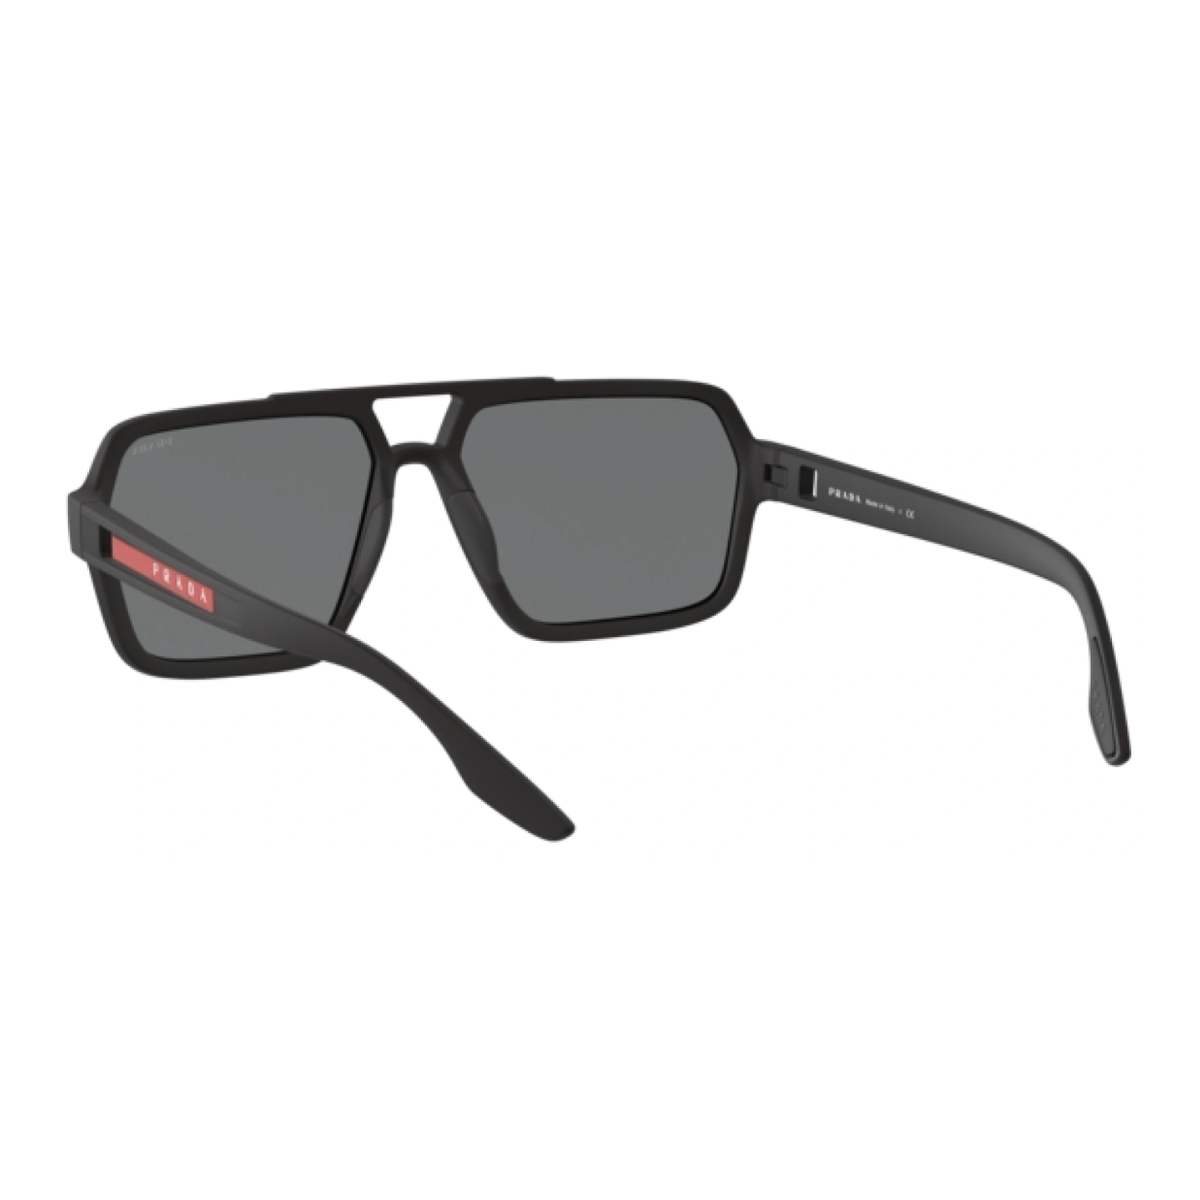 "Shop now at Optorium for Prada SPS 01X DG0-08F grey square sunglasses, offering a stylish accessory suitable for both men and women. Upgrade your eyewear collection with these sleek and fashionable shades from Prada."